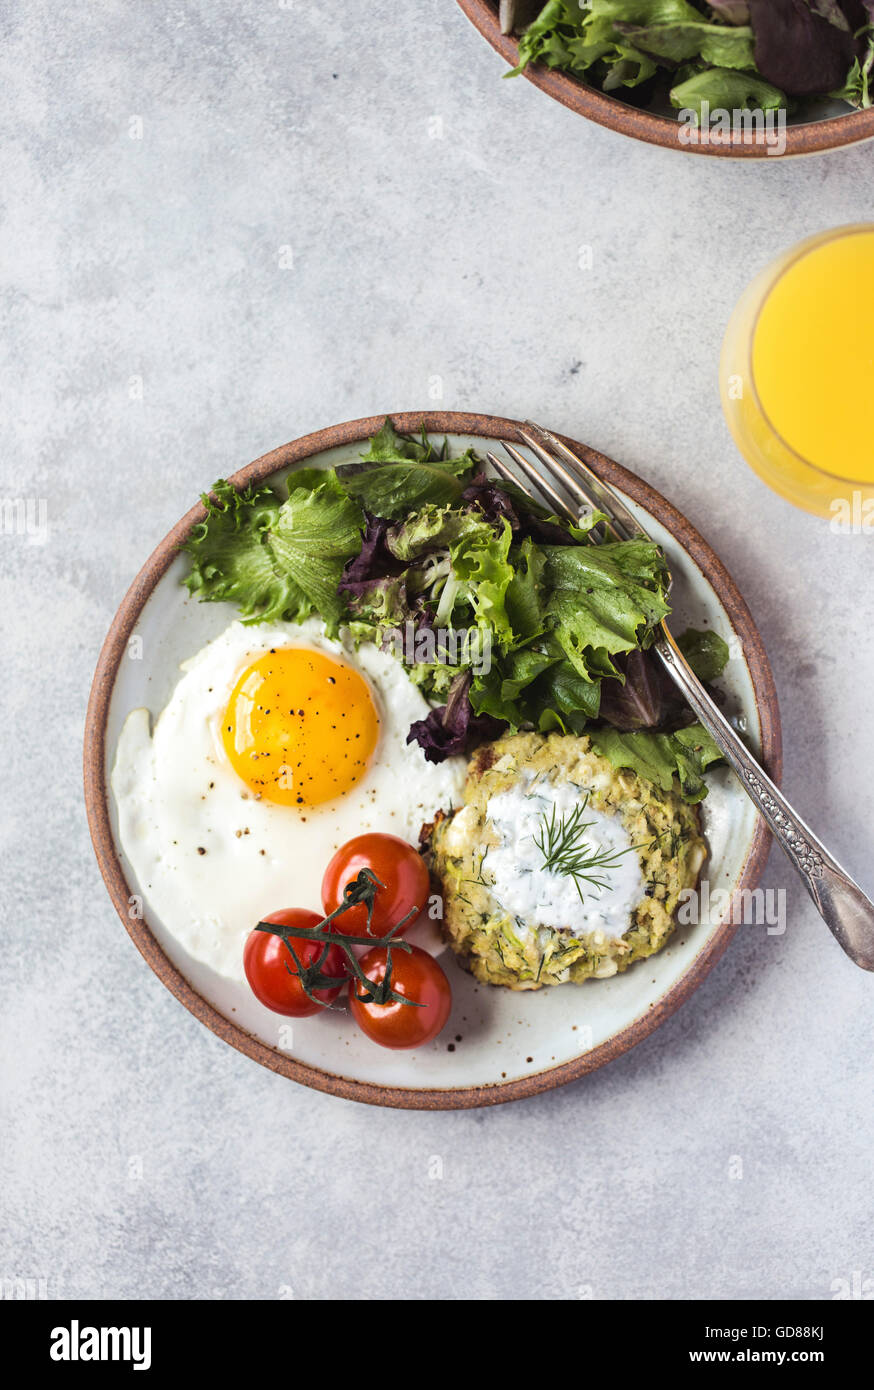 A fried egg, green salad, and a zucchini fritter are served on a plate photographed from the top. Stock Photo